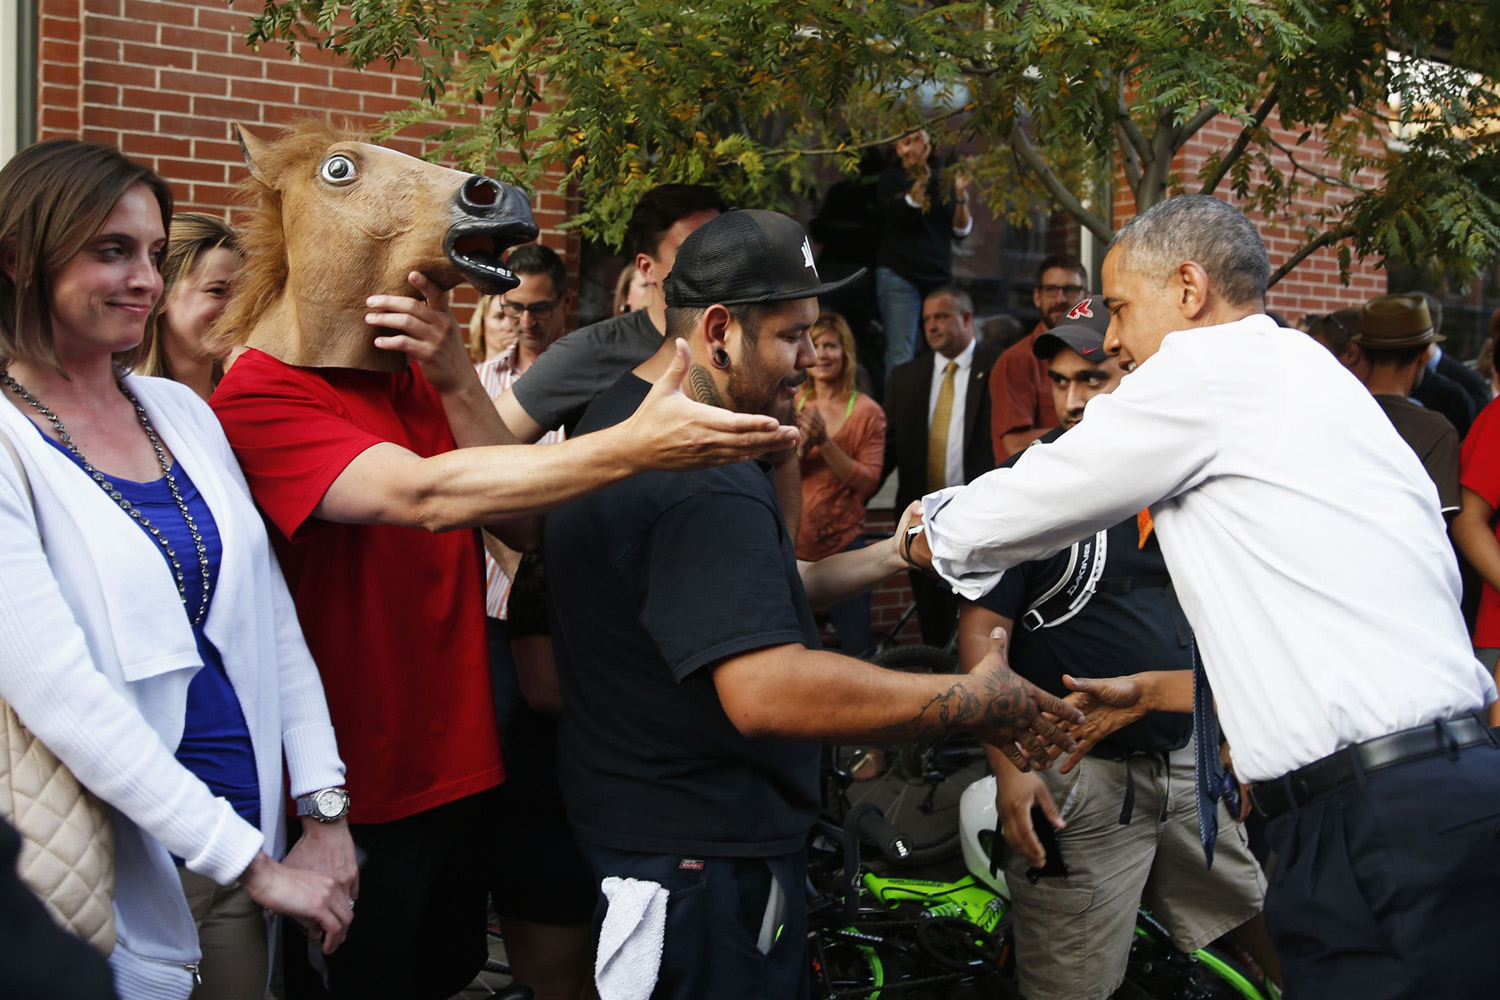 A man wearing a horse mask reaches out to shake hands with President Barack Obama during a walkabout in Denver on July 8, 2014.